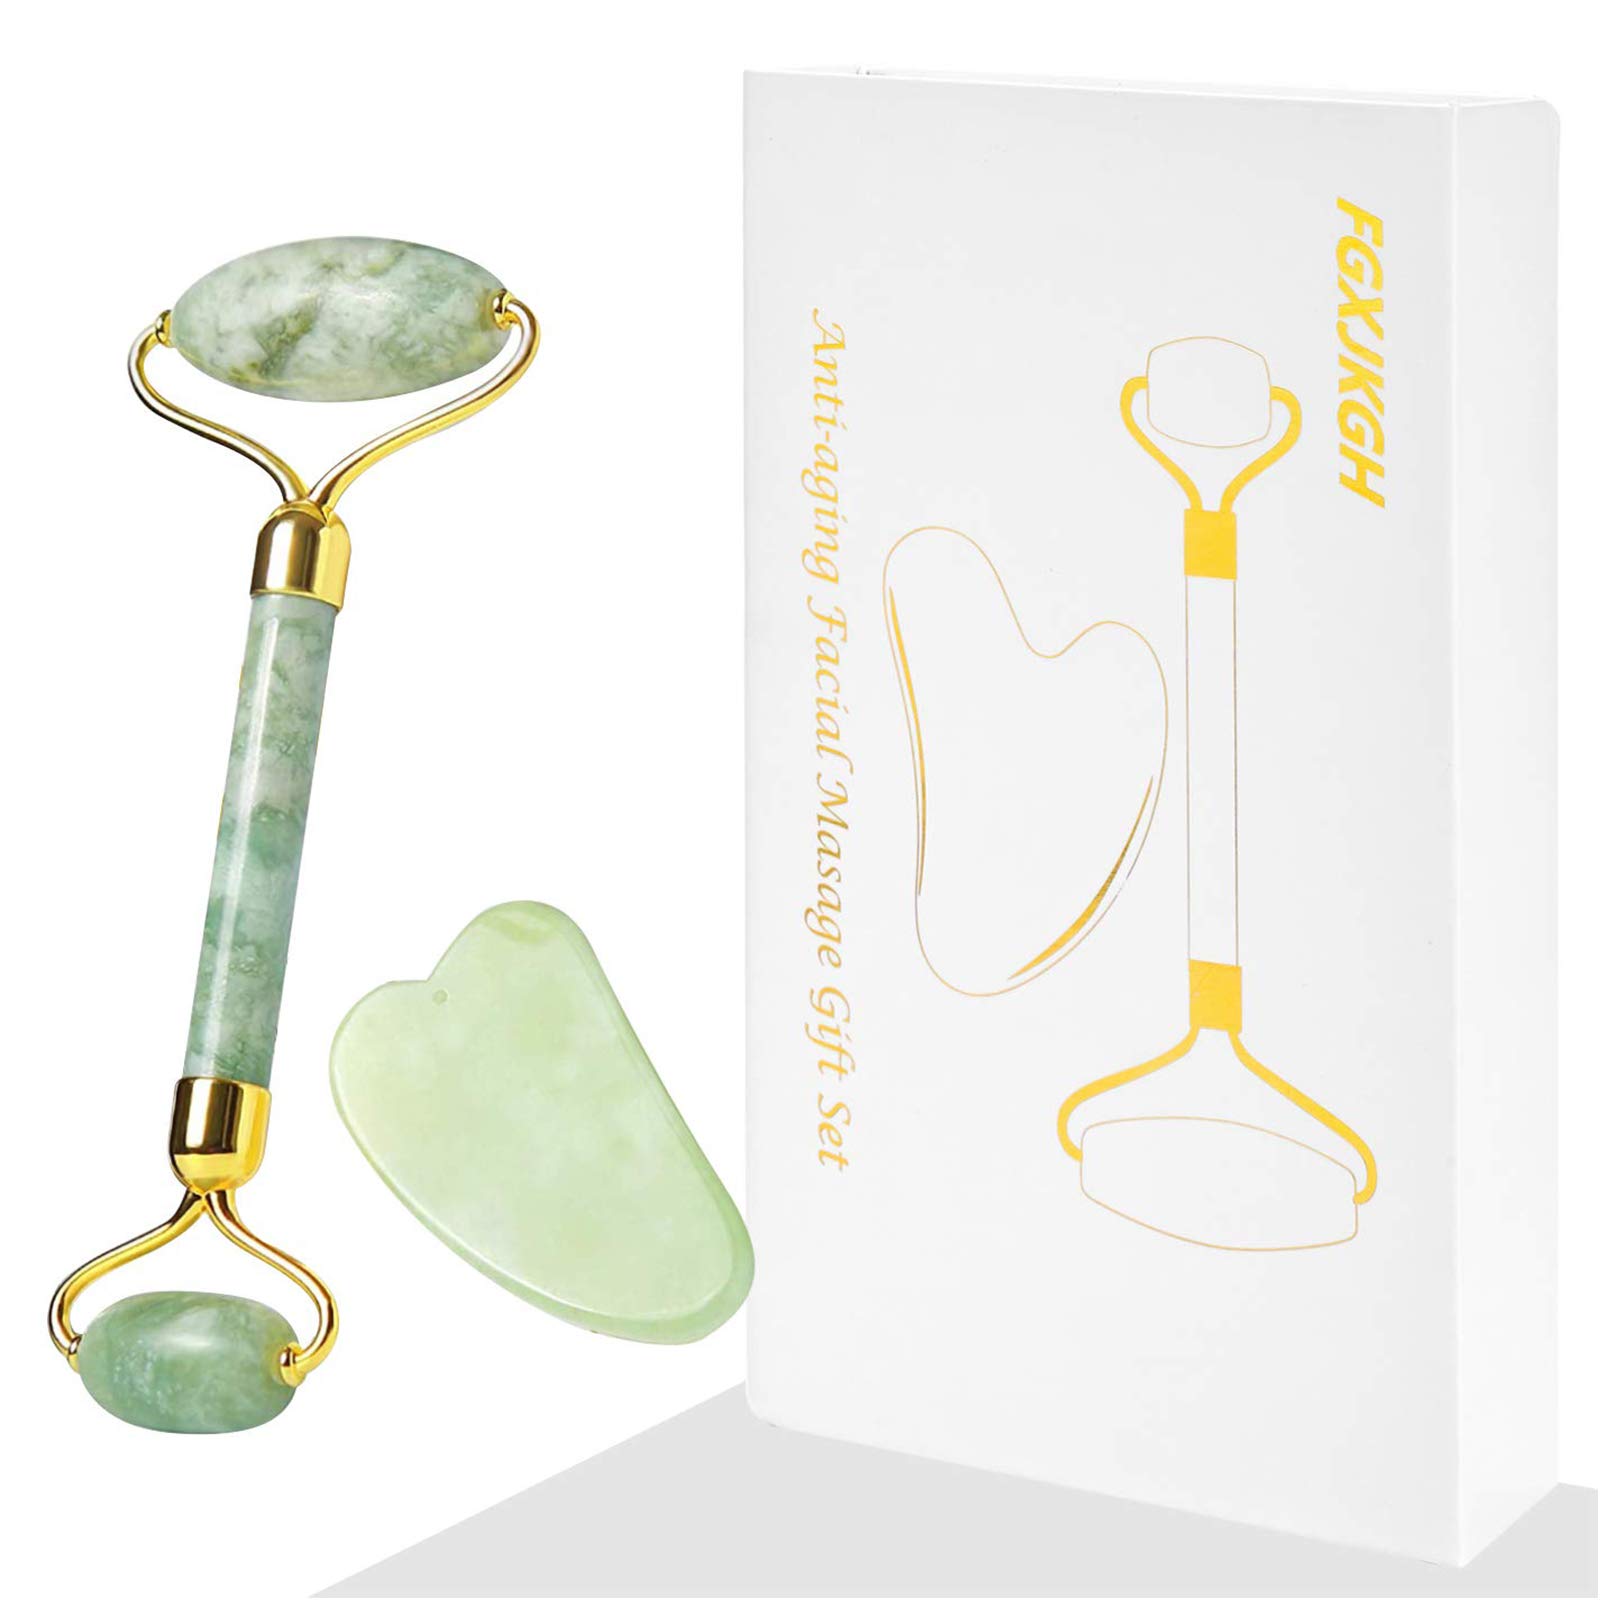 Book Cover Jade Roller Gua Sha Set FGXJKGH Facial Roller Massager Body Eyes Neck Massager Tool for Eye Puffiness,Aging Release Pressure Natural Jade Stone (GREEN)